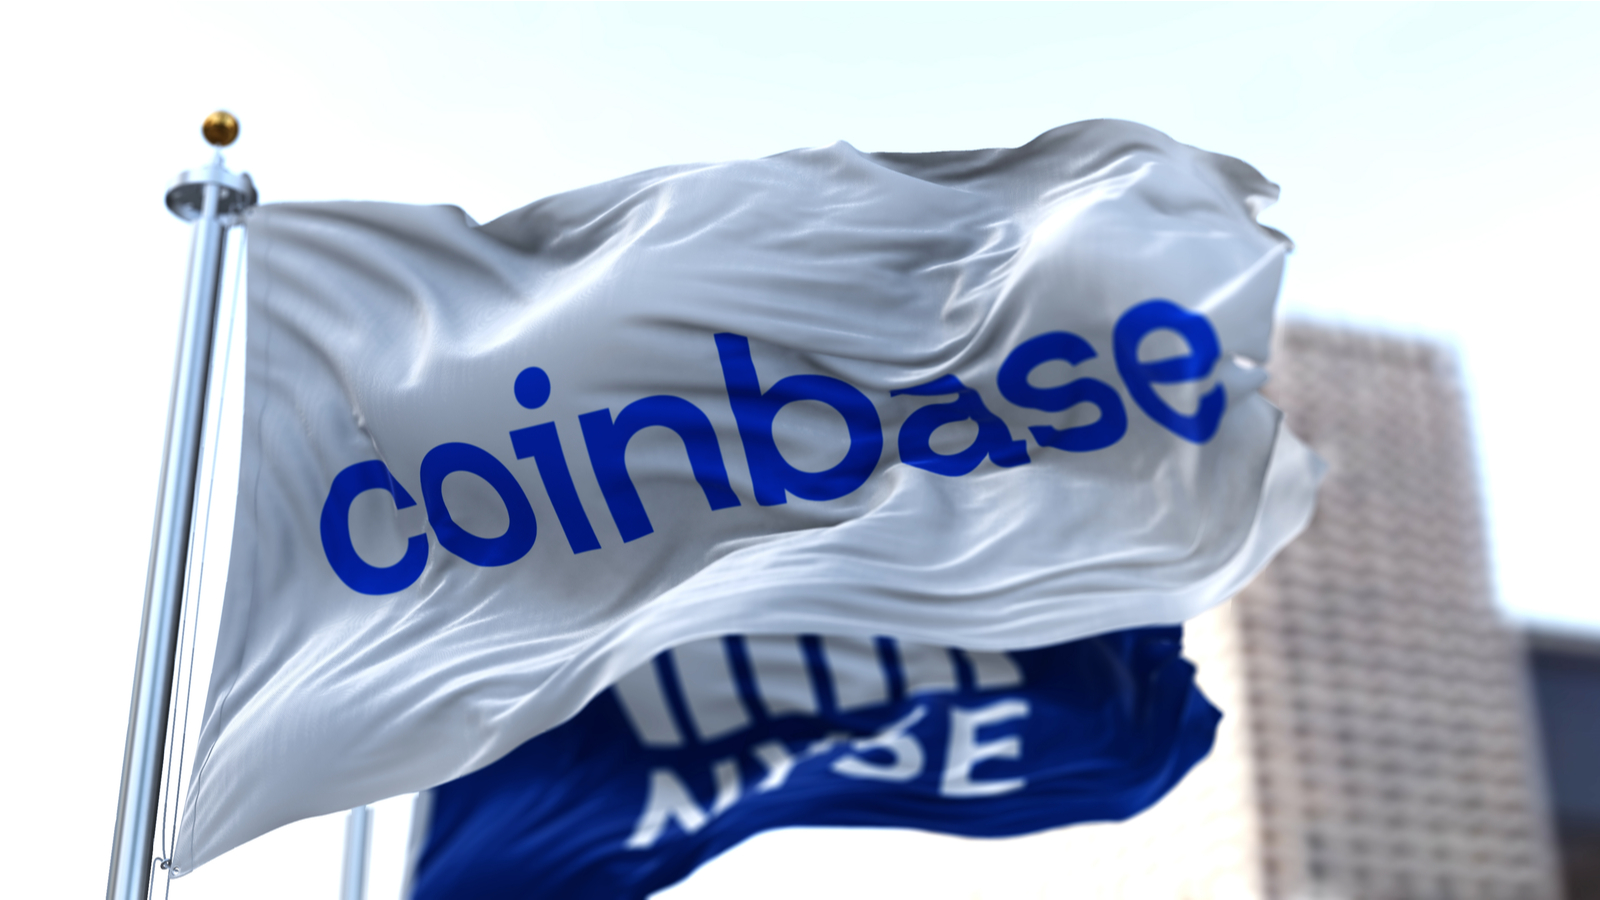 Flags of Coinbase and NYSE flying in the wind representing COIN Stock.